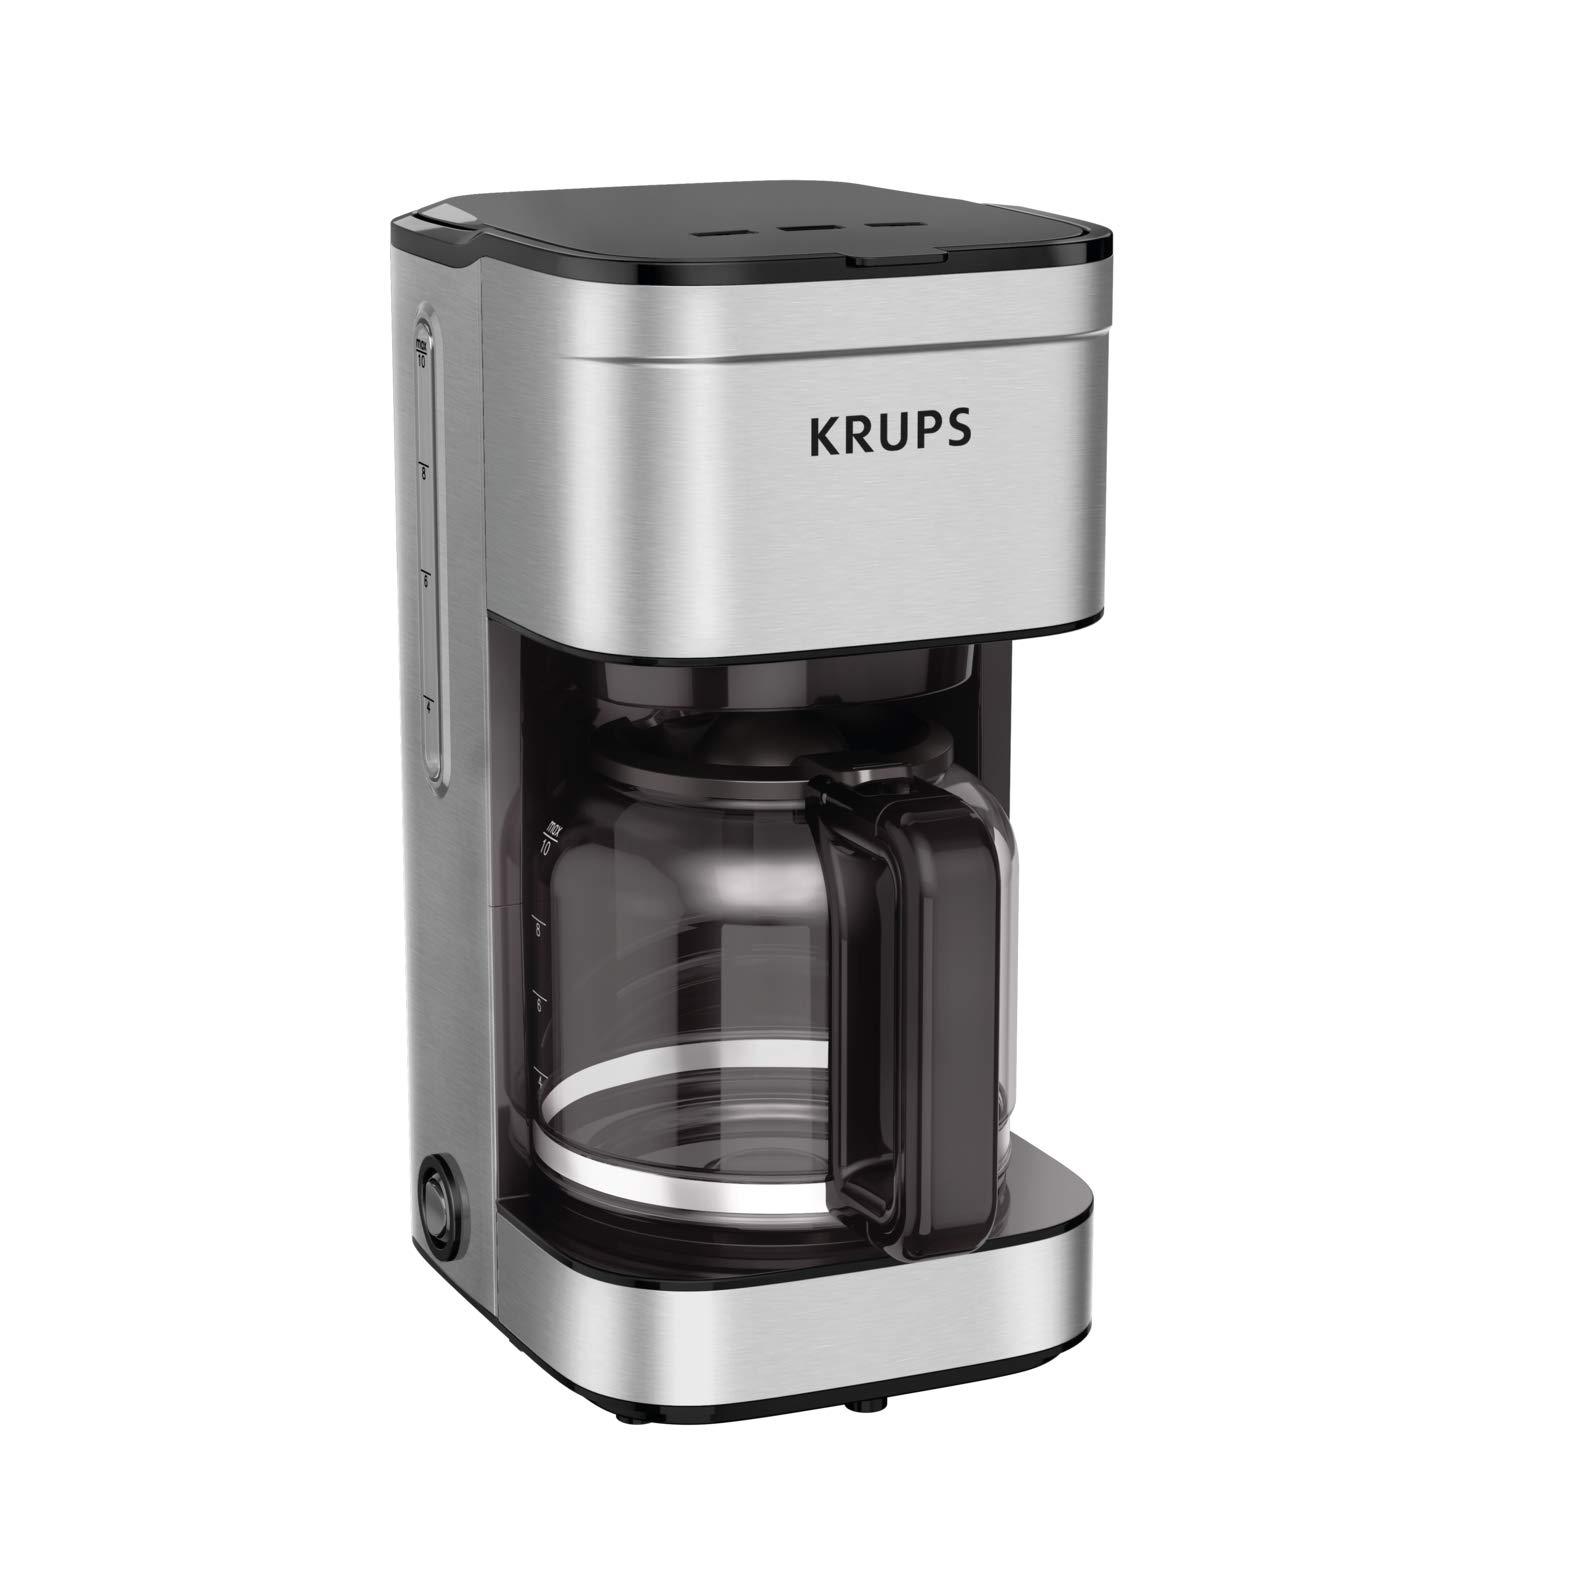 krups simply brew stainless steel drip coffee maker 10 cup 900 watts coffee filter, drip free, dishwasher safe pot silver and